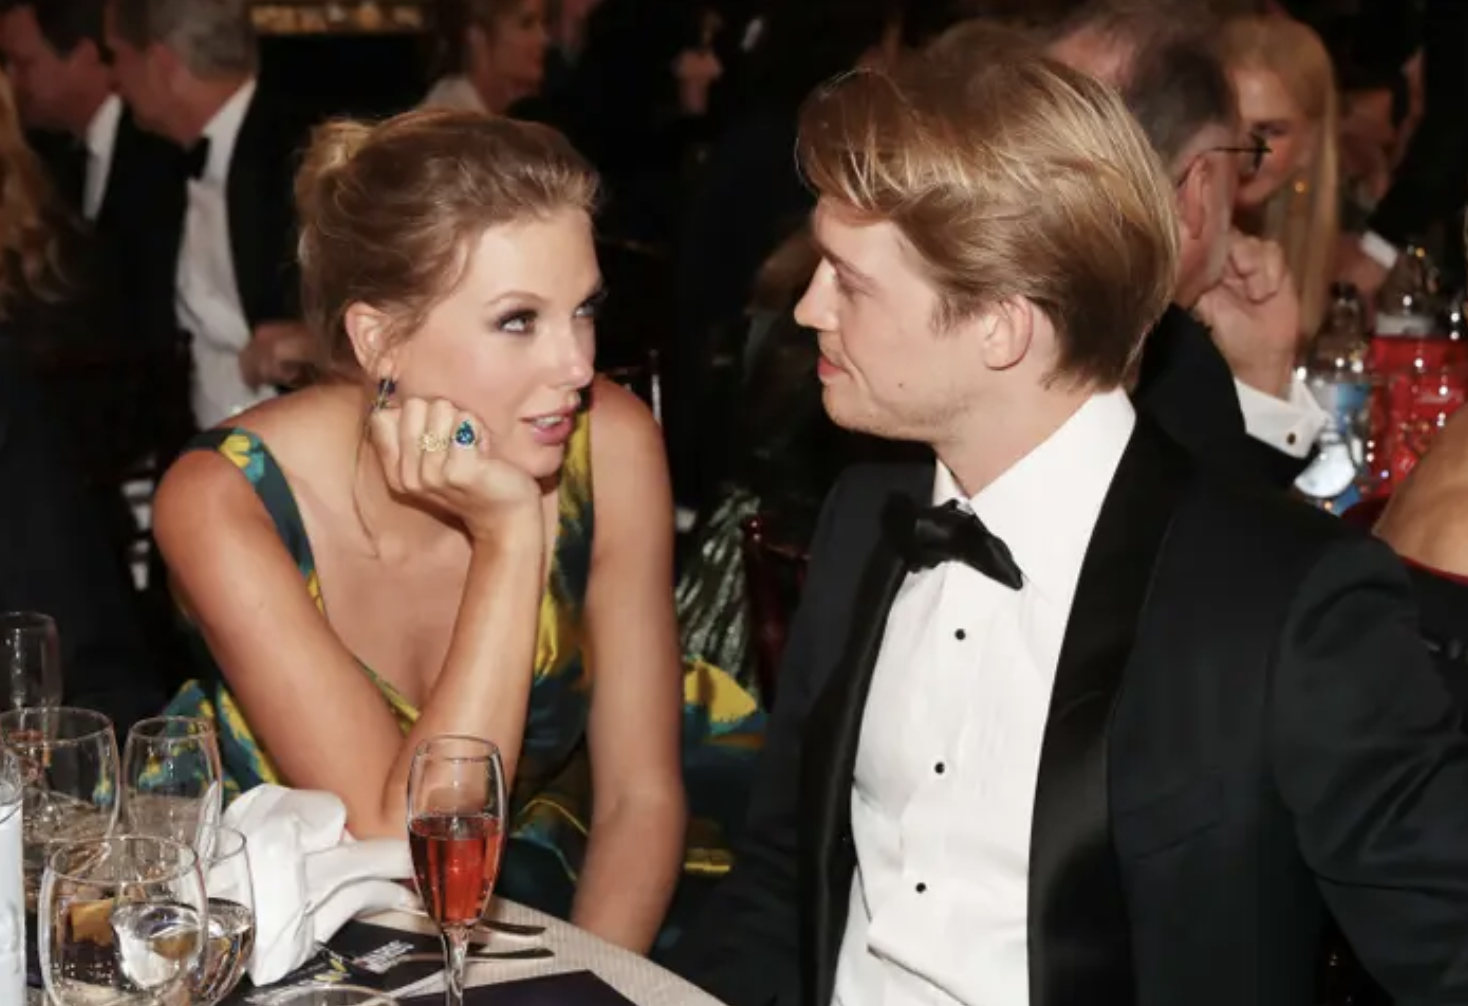 Taylor Swift smiles at Joe Alwyn sitting at a table at a formal event